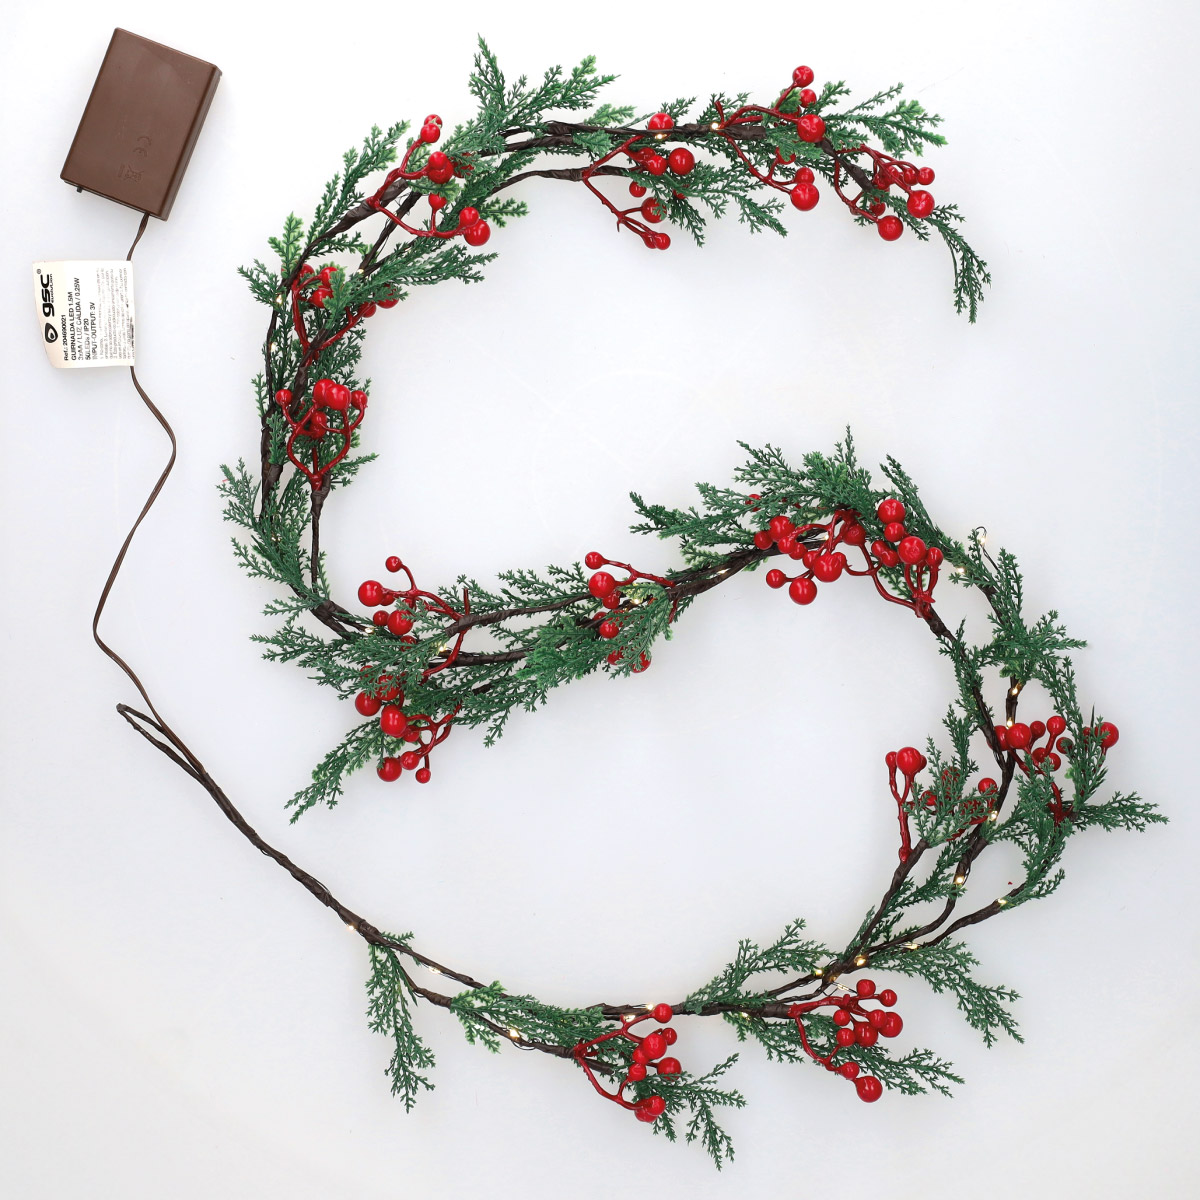 1,5M LED garland with red berries and branches Warm White